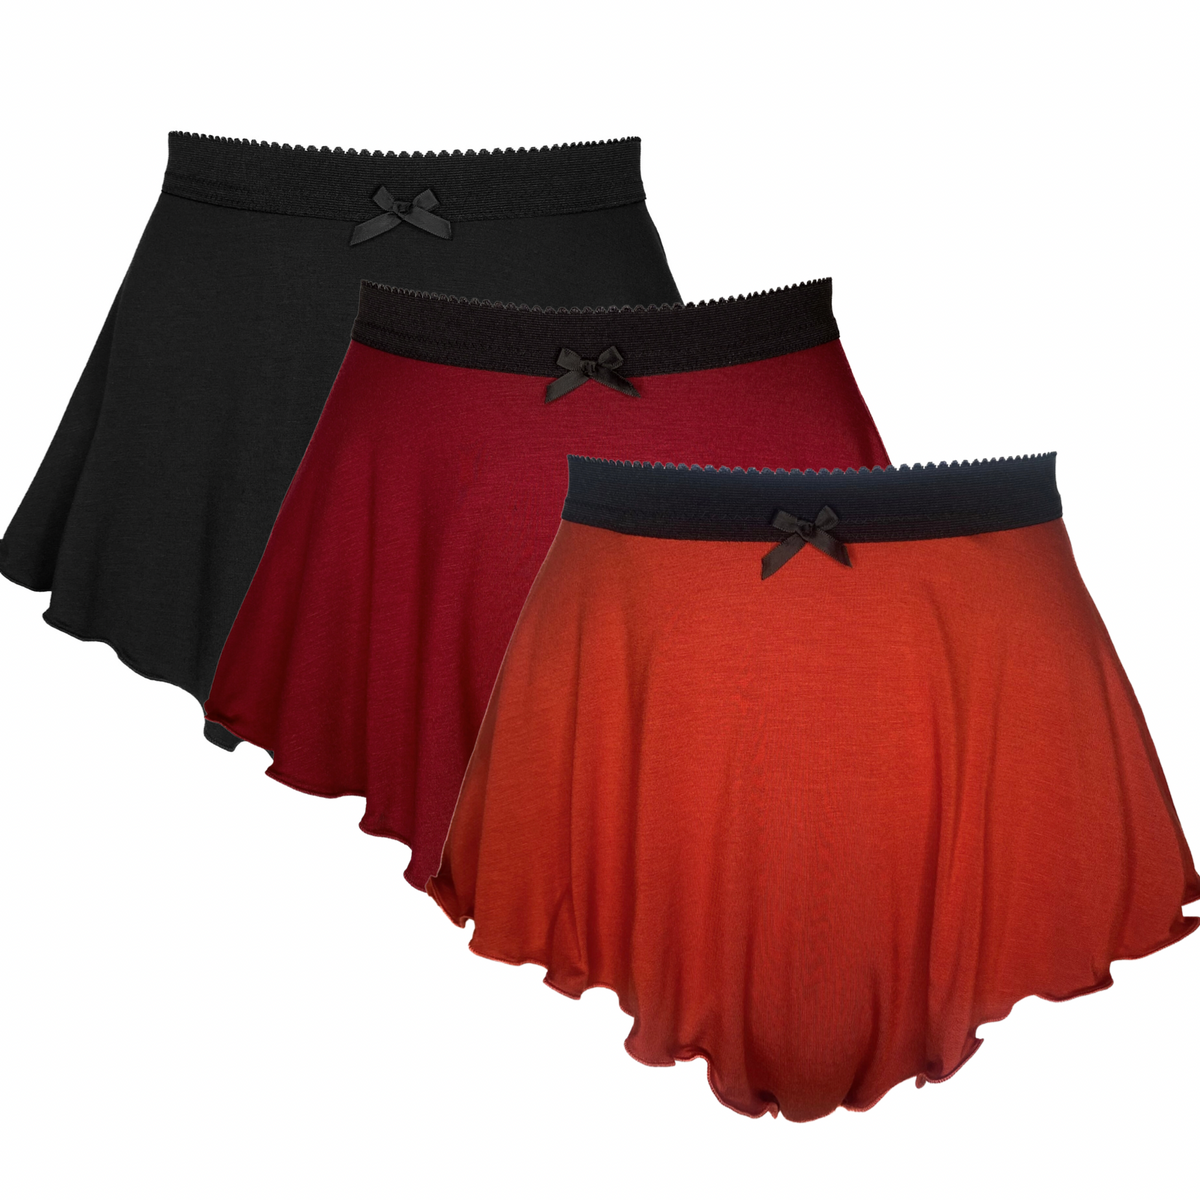 Tall French Knicker Trio - Cherry Red, Terracotta, & Black Bamboo